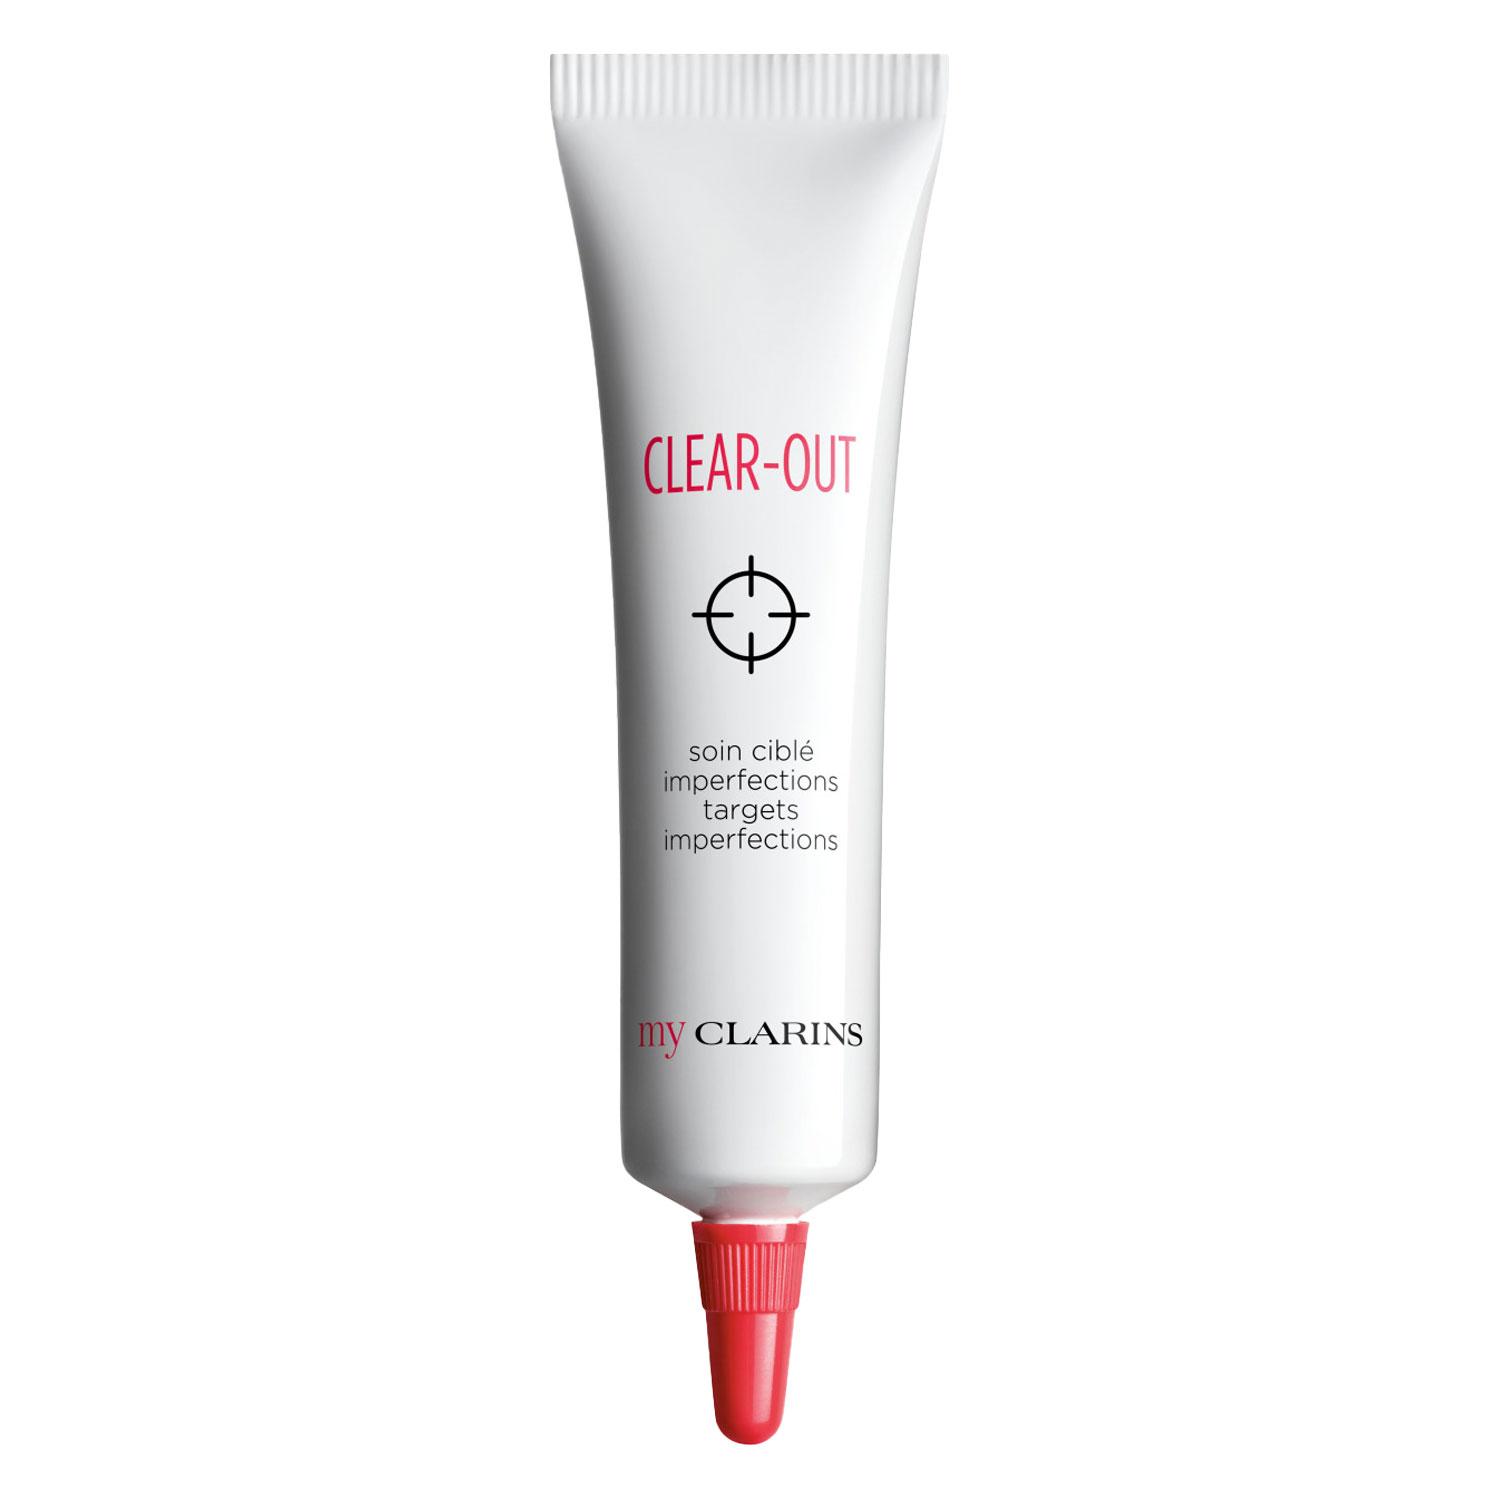 myCLARINS - CLEAR-OUT Targets Imperfections